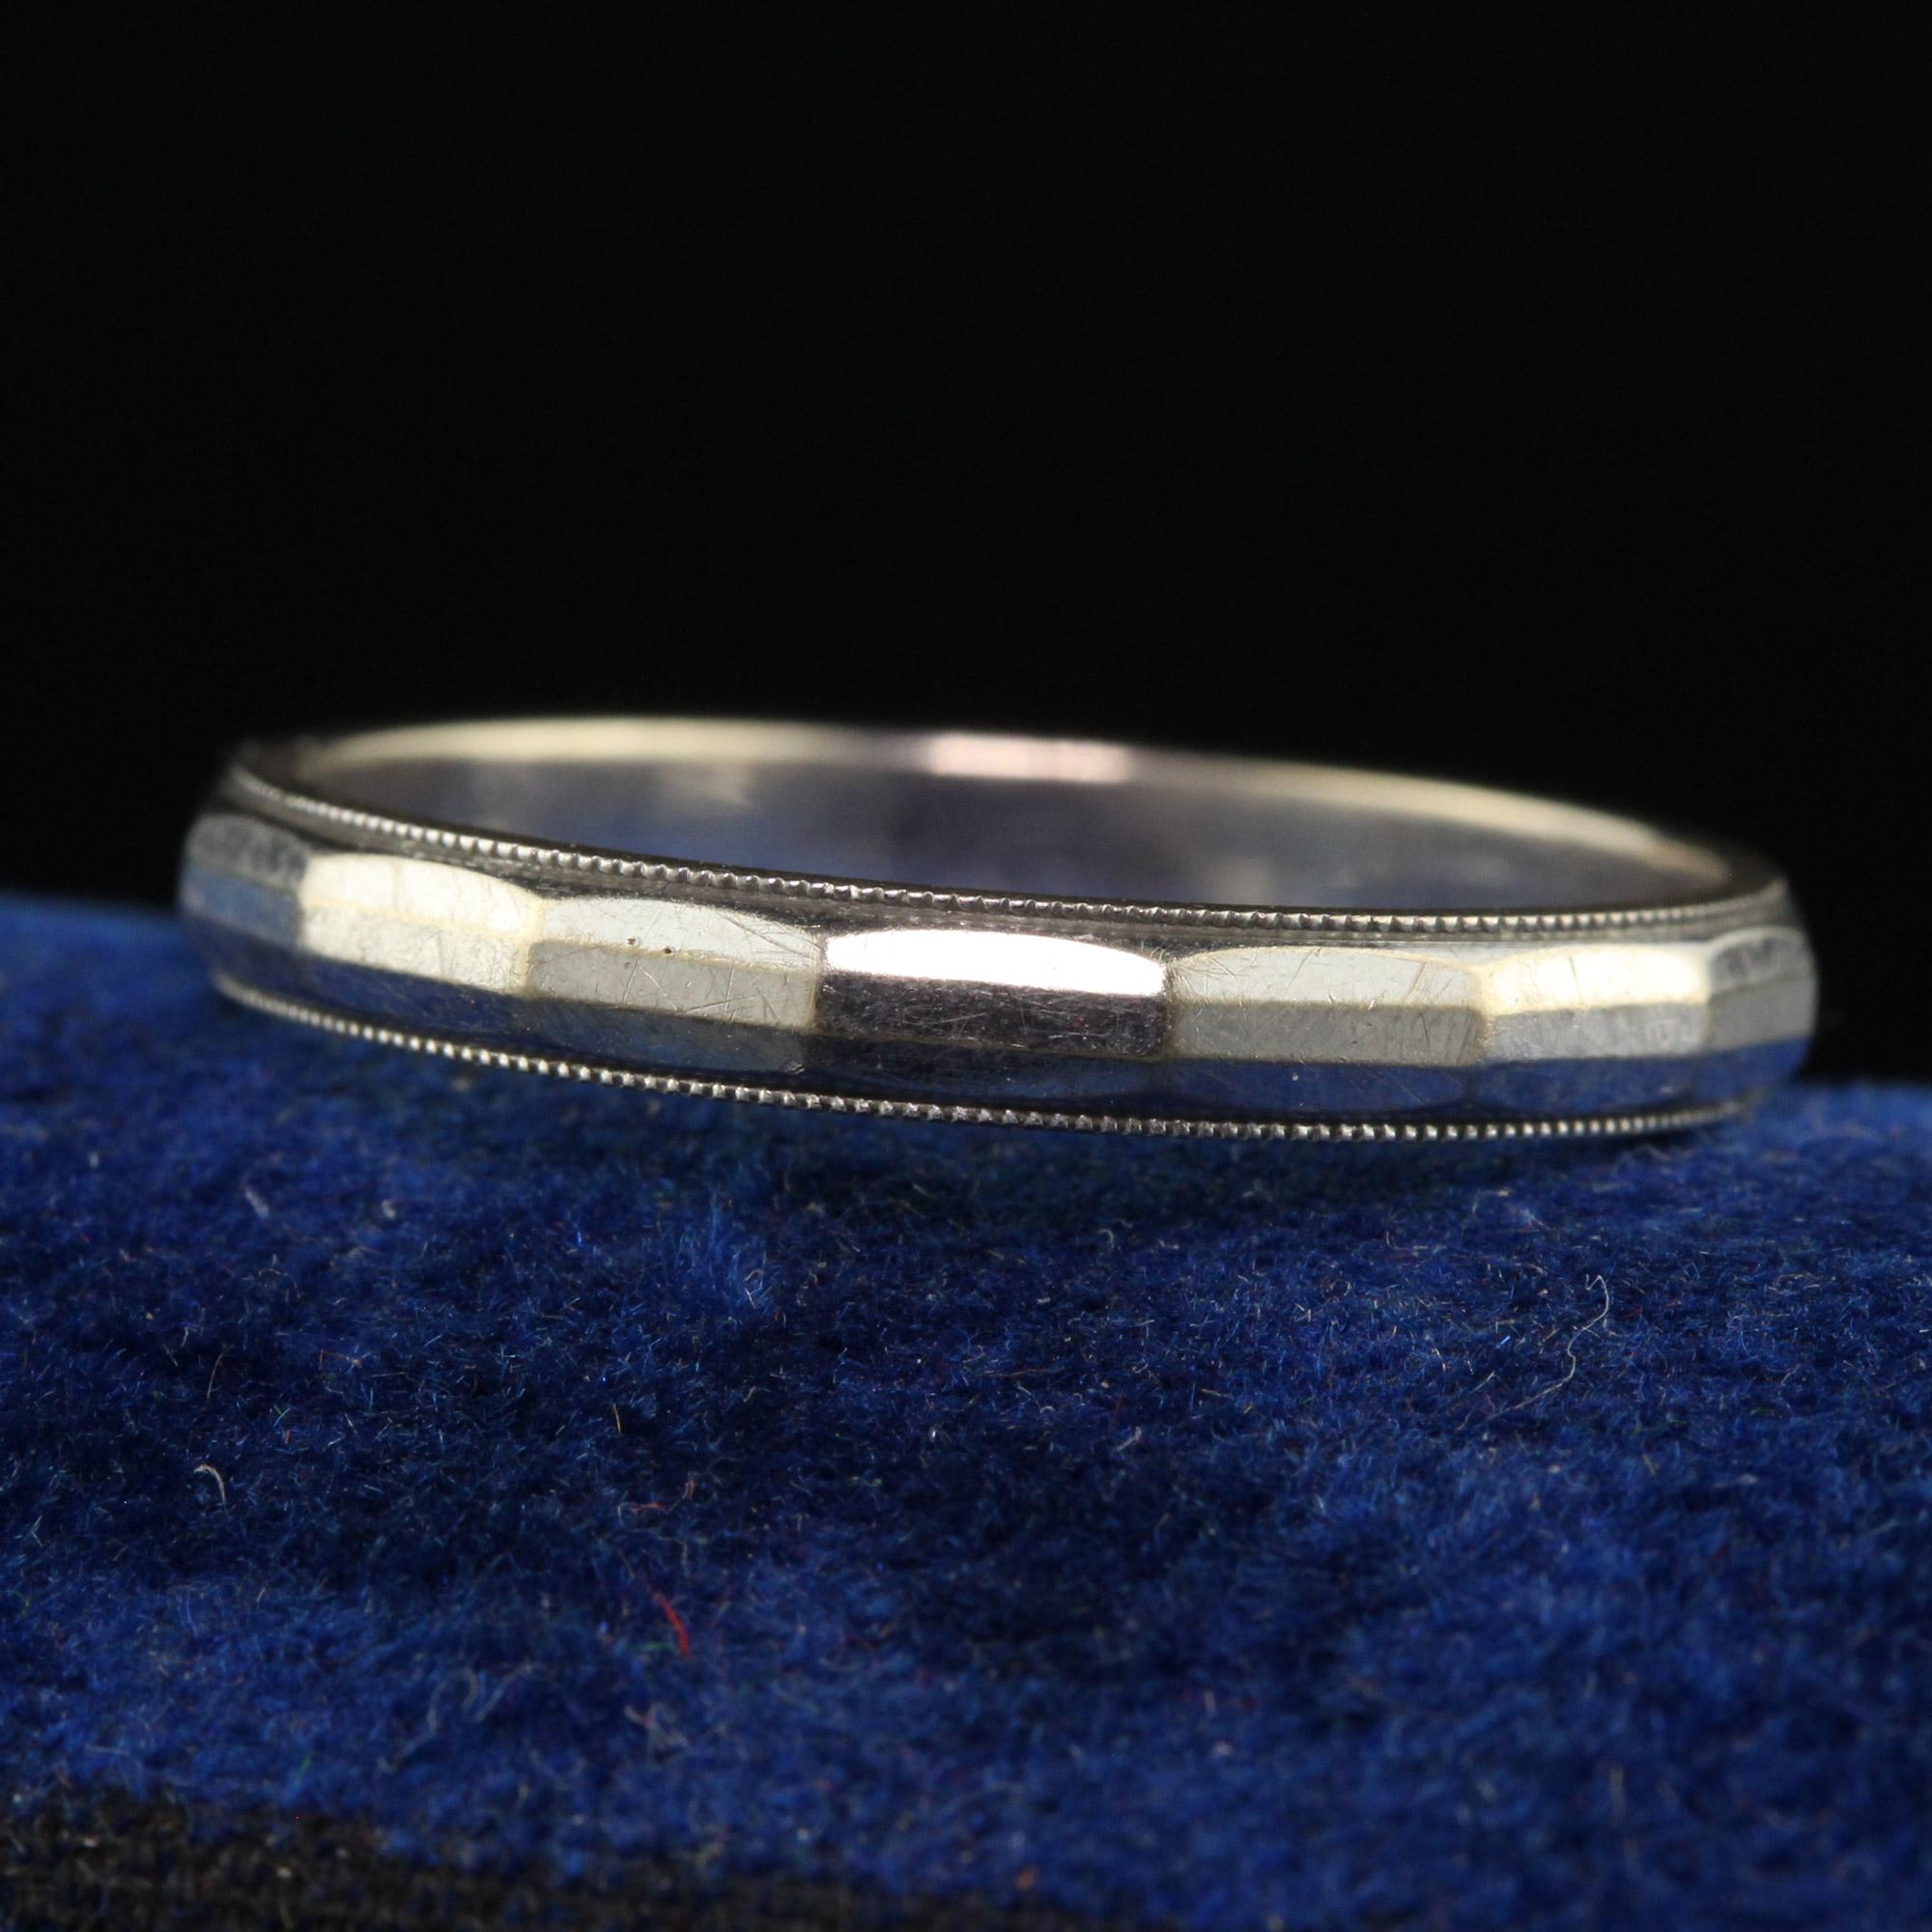 Beautiful Antique Art Deco 14K White Gold Geometric Wedding Band - Size 6 1/2. This gorgeous wedding band is crafted in 14k white gold. The ring has a nice geometric pattern going around the entire ring and has milgraining on the borders. The ring